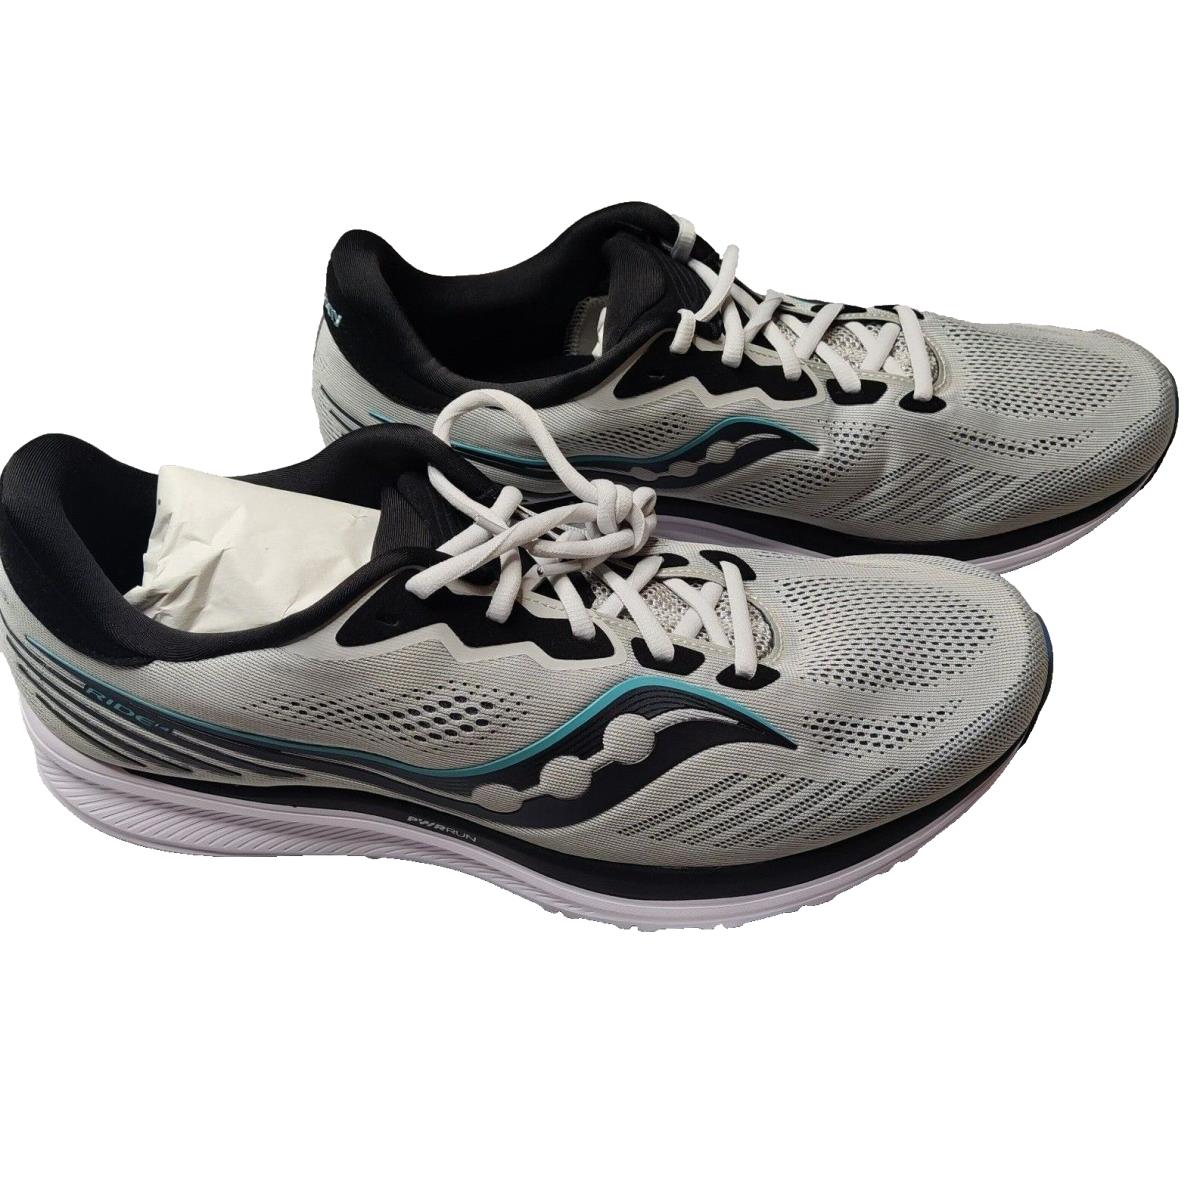 Saucony Ride 14 Men Size 14 Gray Black Running Shoes